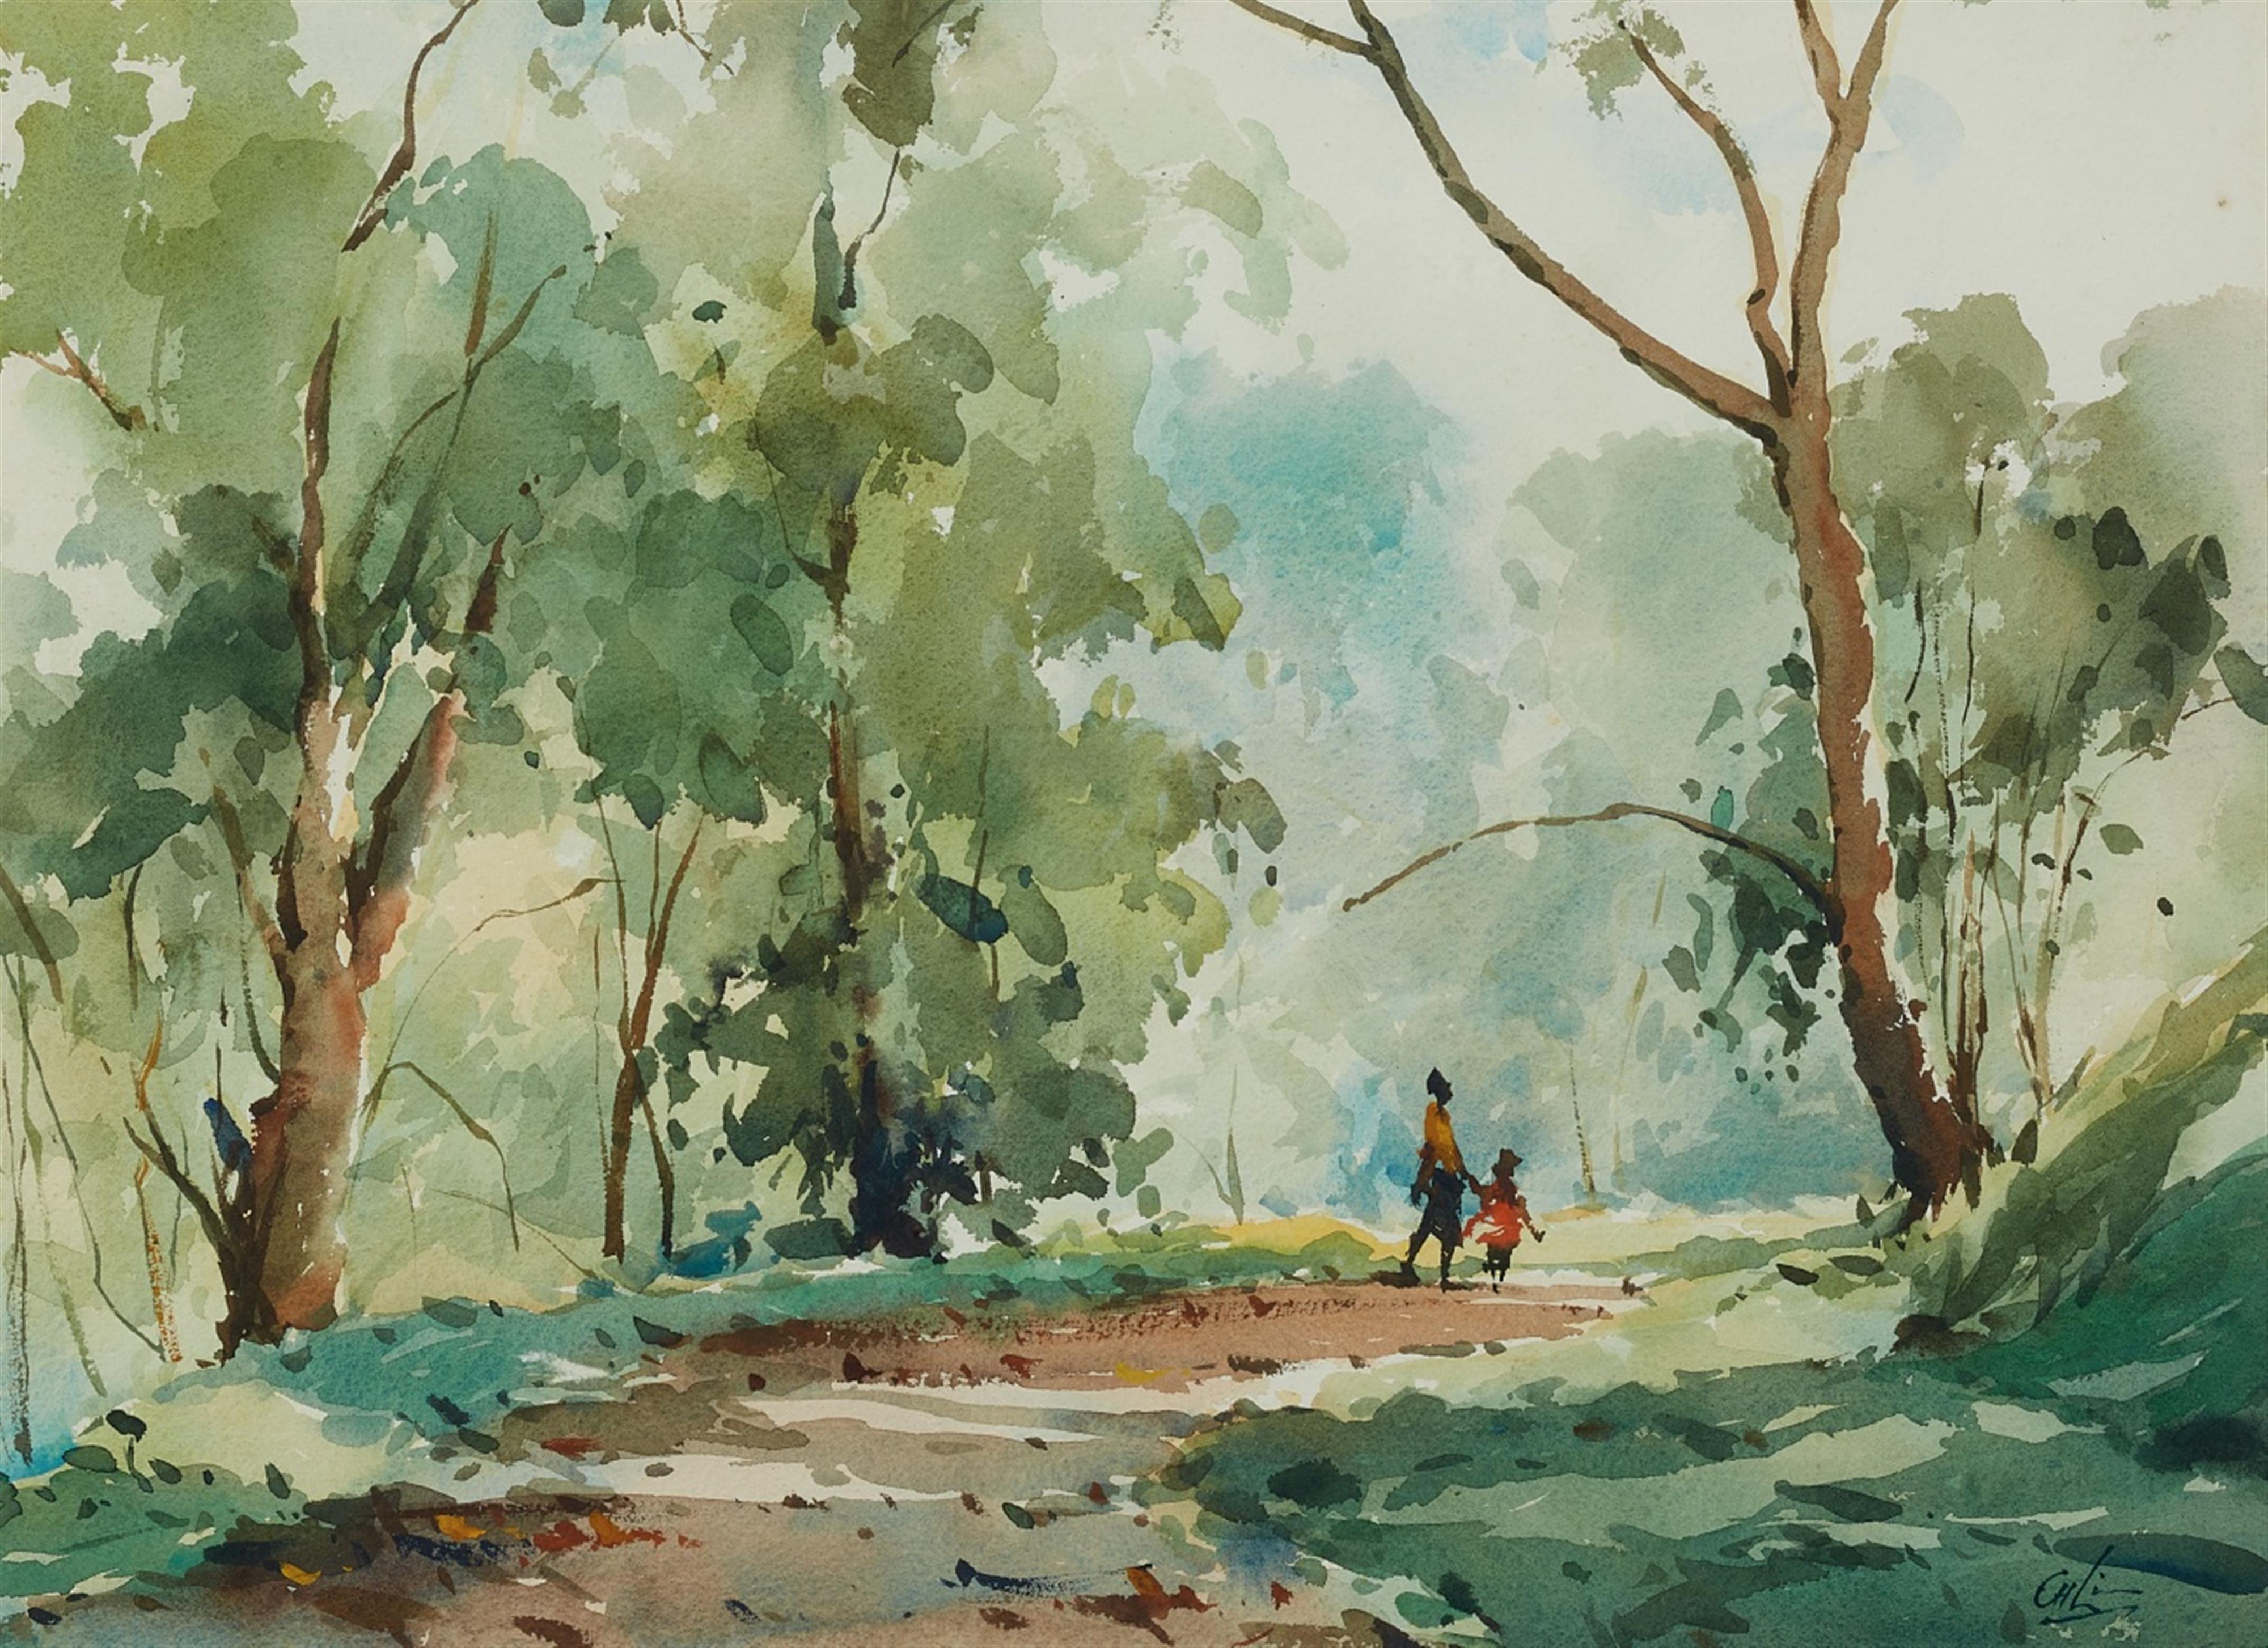 Lim Cheng Hoe . 1970 - Scenery I, Walking in the woods. Ink and colour on paper. Signed C.H Lim.
Matted, framed and glazed. - image-1